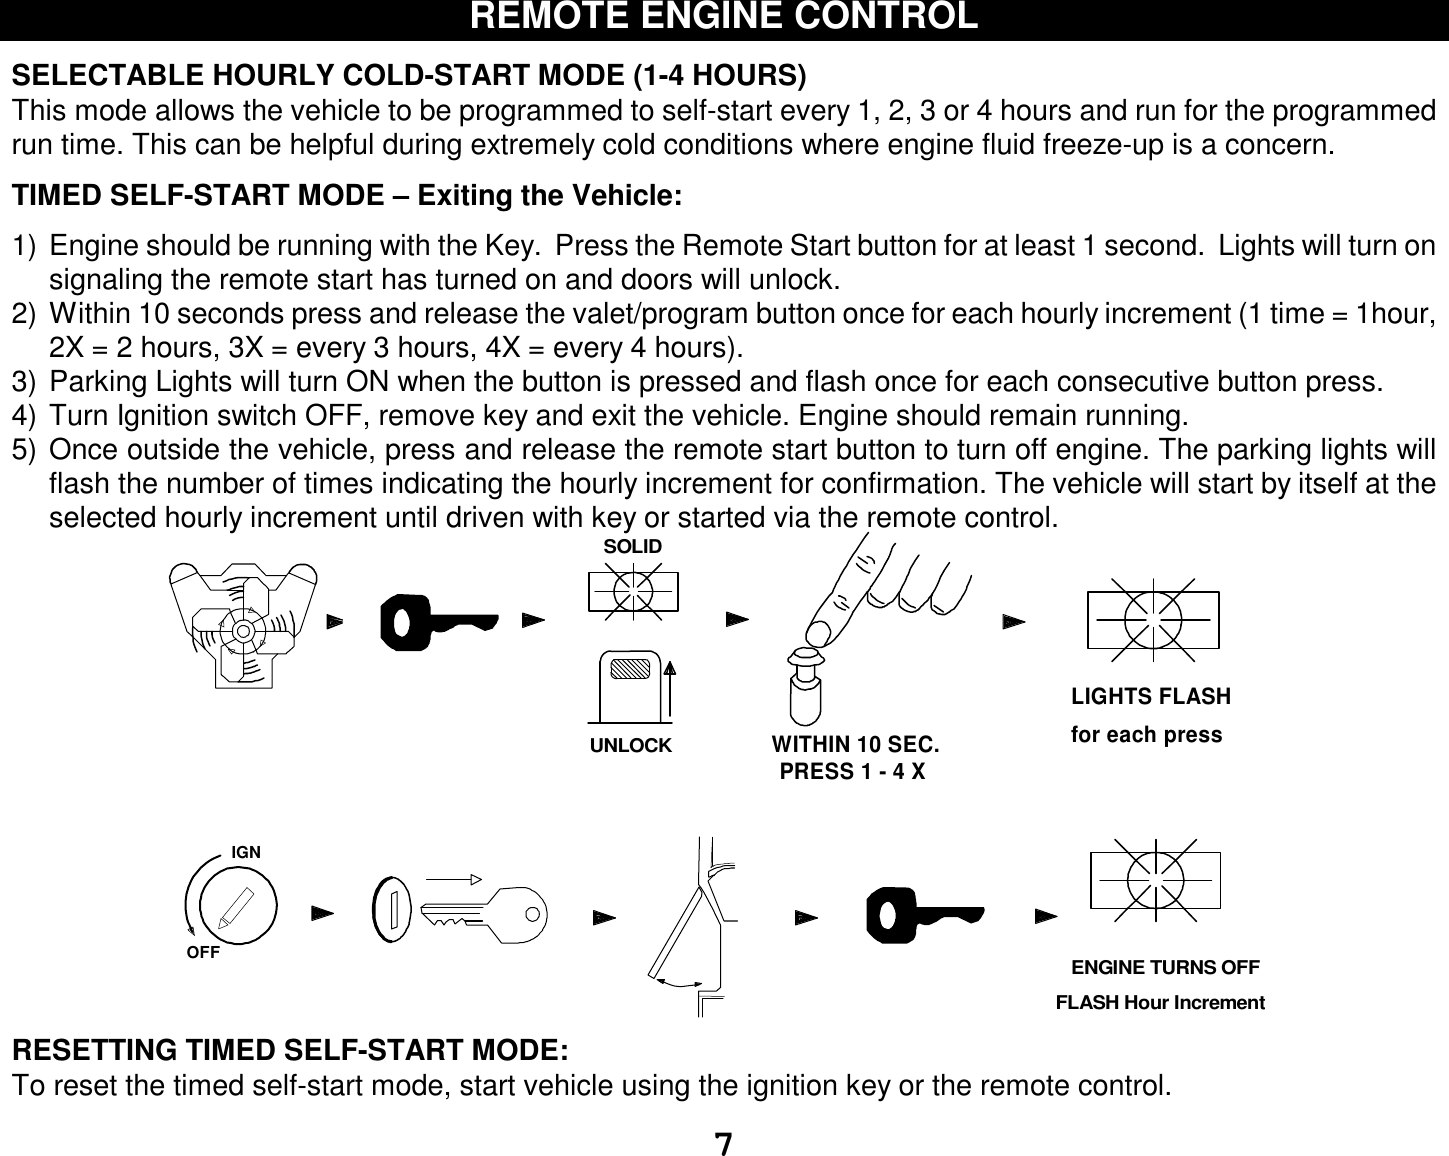  7 REMOTE ENGINE CONTROL  SELECTABLE HOURLY COLD-START MODE (1-4 HOURS) This mode allows the vehicle to be programmed to self-start every 1, 2, 3 or 4 hours and run for the programmed run time. This can be helpful during extremely cold conditions where engine fluid freeze-up is a concern.   TIMED SELF-START MODE – Exiting the Vehicle:  1) Engine should be running with the Key.  Press the Remote Start button for at least 1 second.  Lights will turn on signaling the remote start has turned on and doors will unlock. 2) Within 10 seconds press and release the valet/program button once for each hourly increment (1 time = 1hour, 2X = 2 hours, 3X = every 3 hours, 4X = every 4 hours).  3) Parking Lights will turn ON when the button is pressed and flash once for each consecutive button press. 4) Turn Ignition switch OFF, remove key and exit the vehicle. Engine should remain running. 5) Once outside the vehicle, press and release the remote start button to turn off engine. The parking lights will flash the number of times indicating the hourly increment for confirmation. The vehicle will start by itself at the selected hourly increment until driven with key or started via the remote control. IGNSOLIDOFFUNLOCKPRESS 1 - 4 XWITHIN 10 SEC.LIGHTS FLASH for each press   ENGINE TURNS OFFFLASH Hour Increment RESETTING TIMED SELF-START MODE: To reset the timed self-start mode, start vehicle using the ignition key or the remote control. 